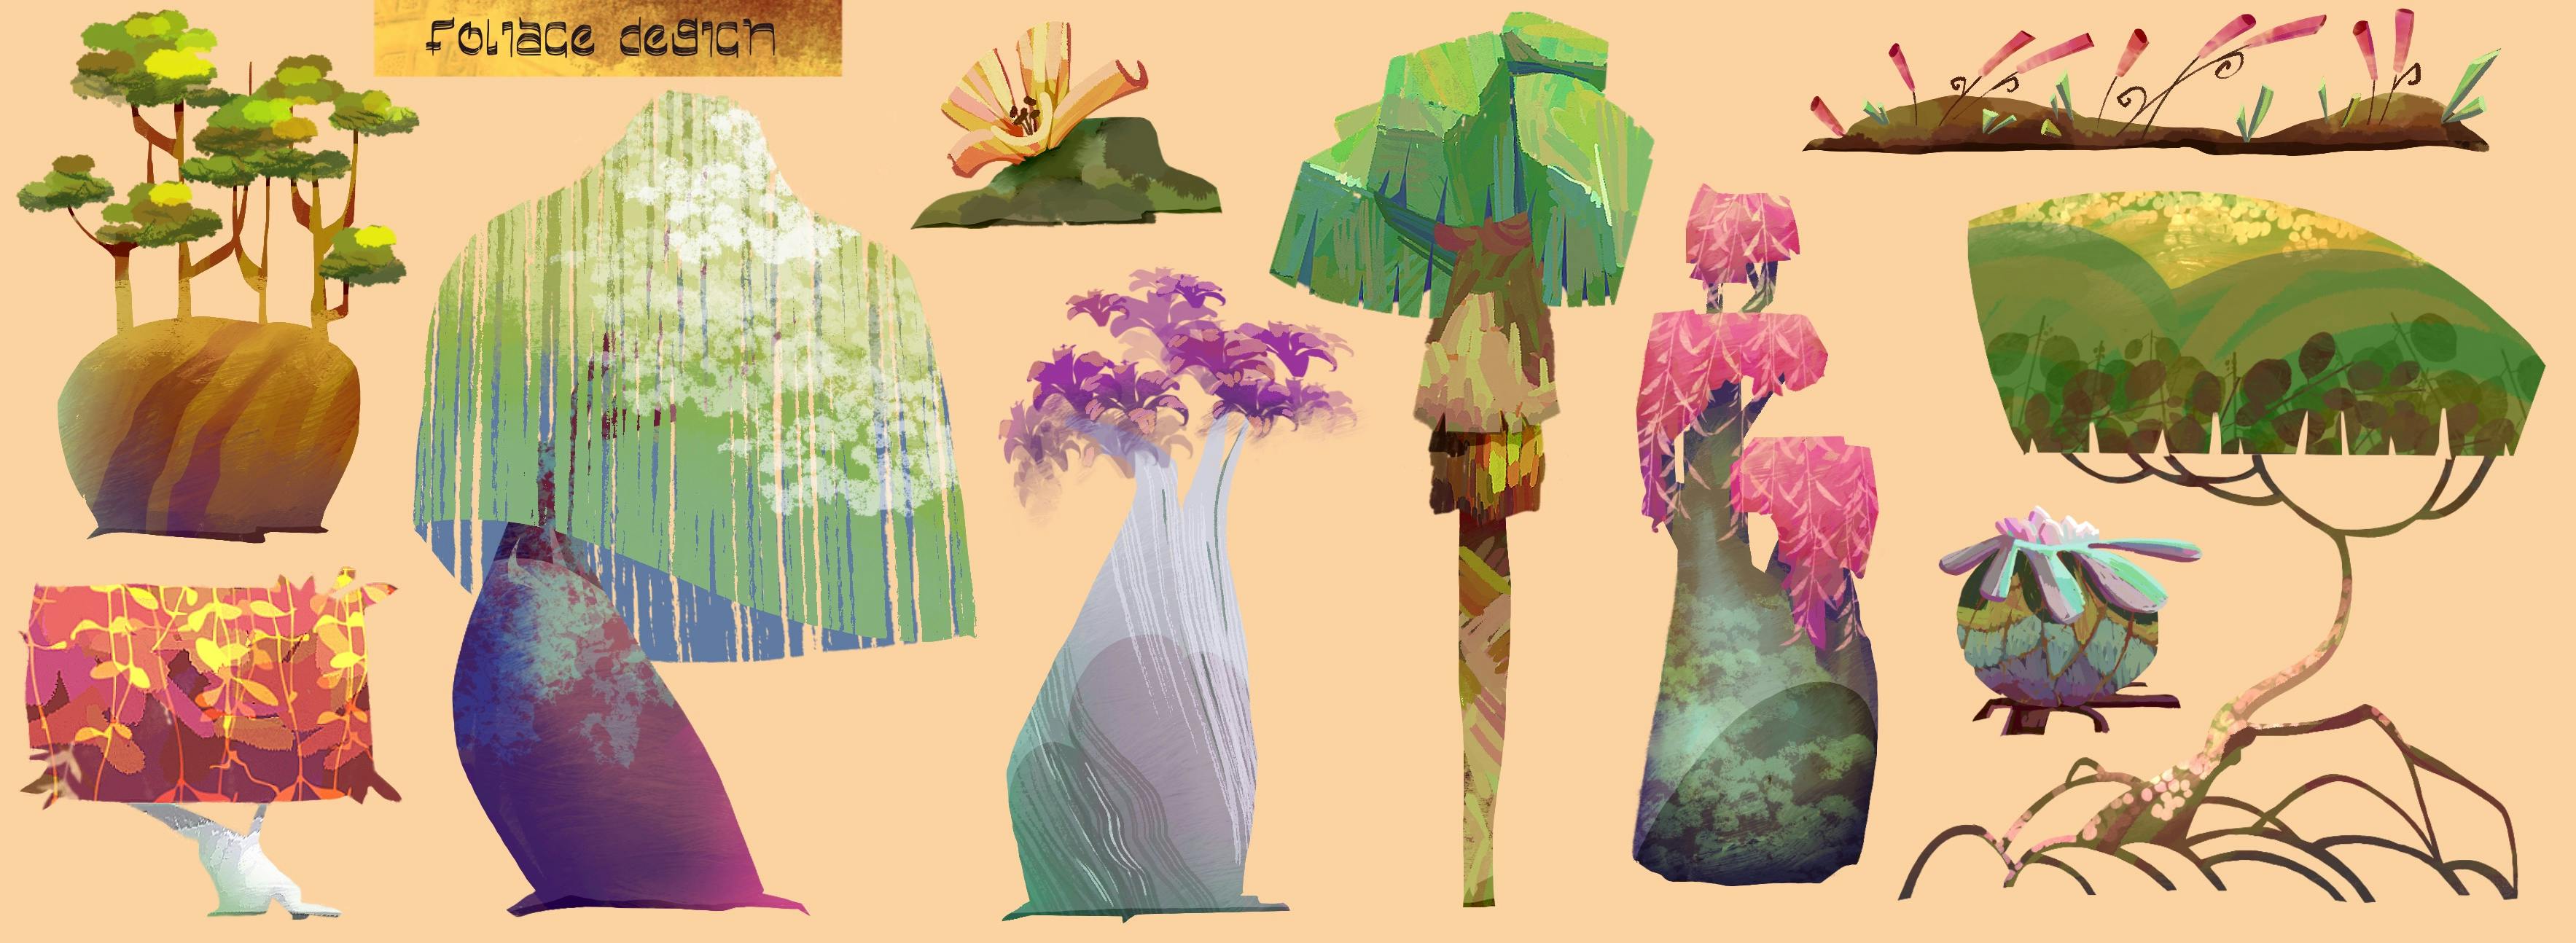 Concept art of trees